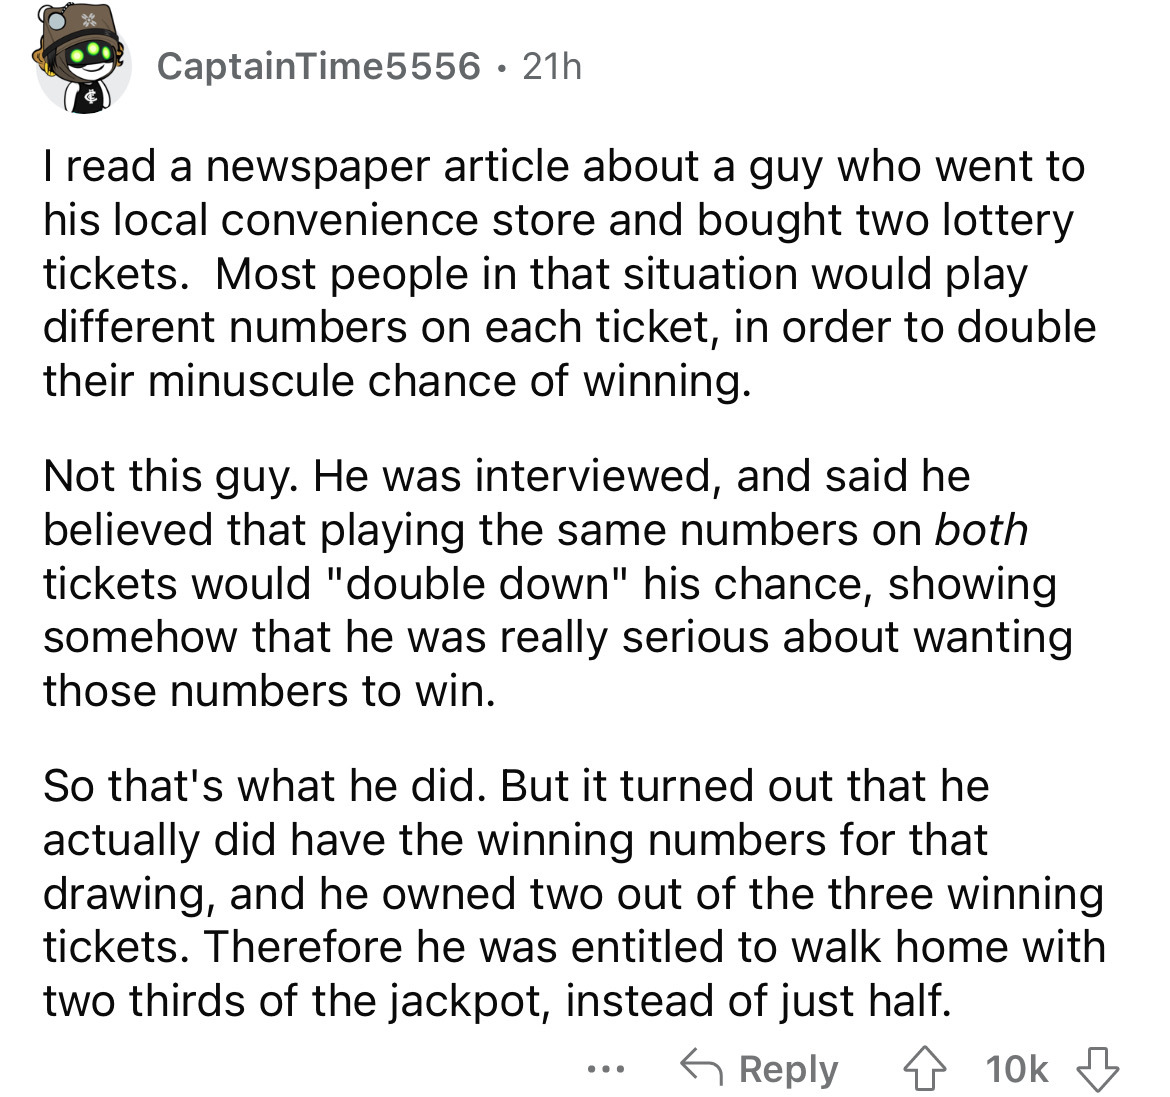 angle - CaptainTime5556 21h I read a newspaper article about a guy who went to his local convenience store and bought two lottery tickets. Most people in that situation would play different numbers on each ticket, in order to double their minuscule chance